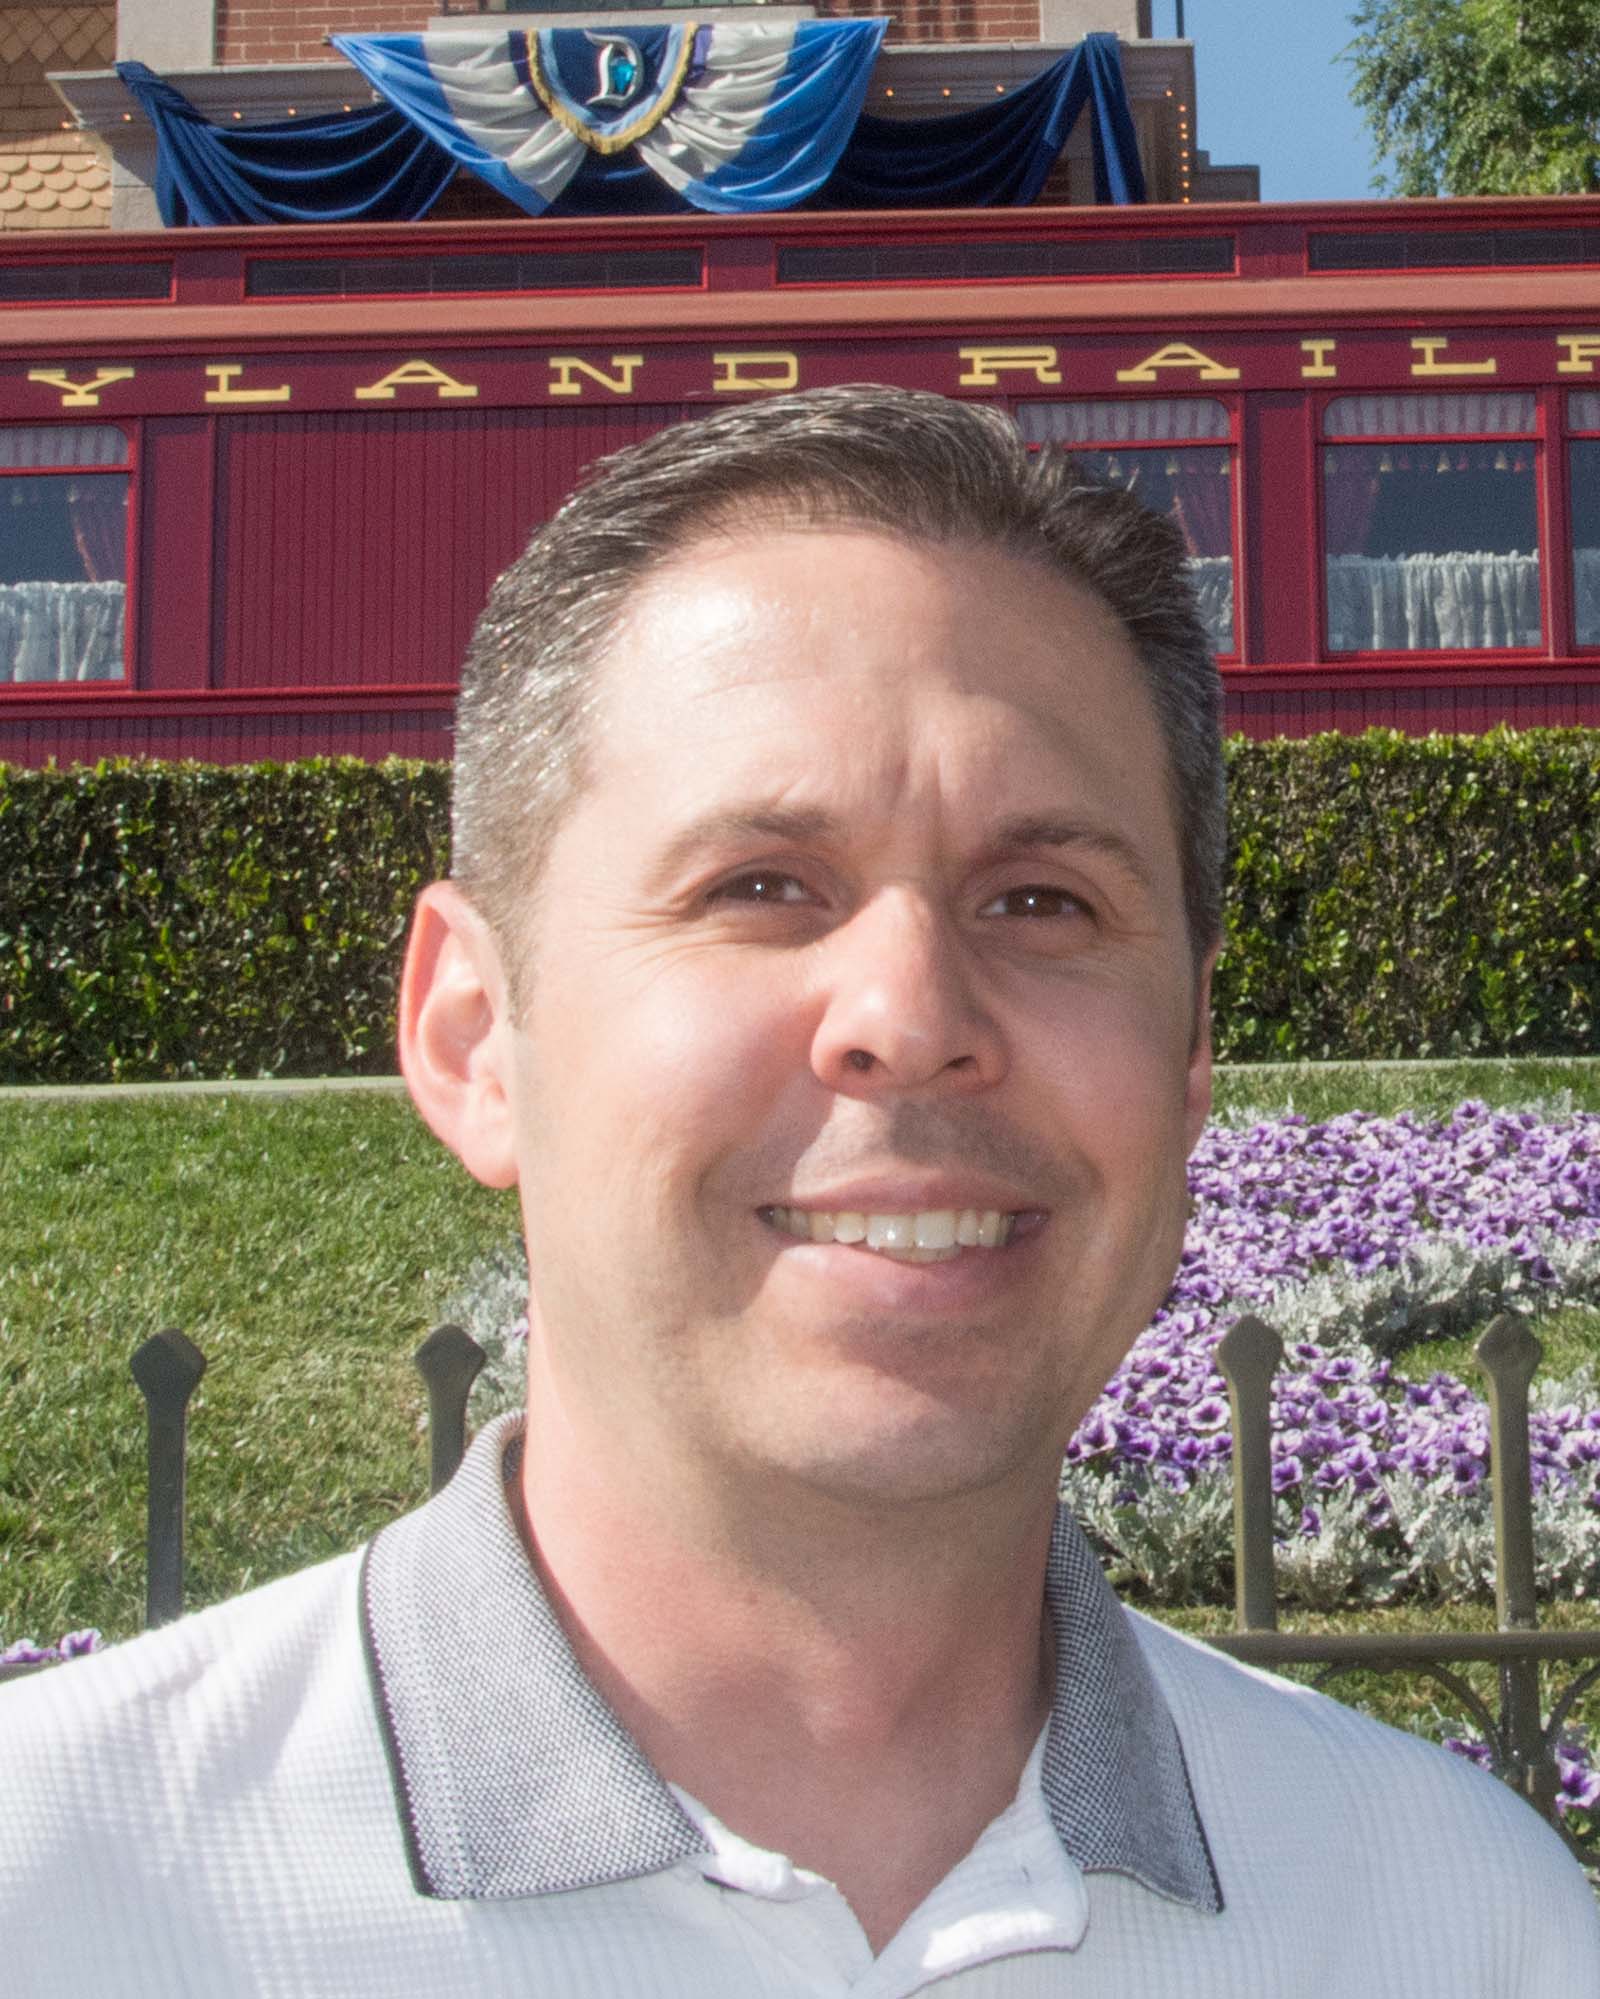 Headshot of Jeff Whitfill, owner of E-Ticket Travel standing in front of the Disneyland Railroad Station